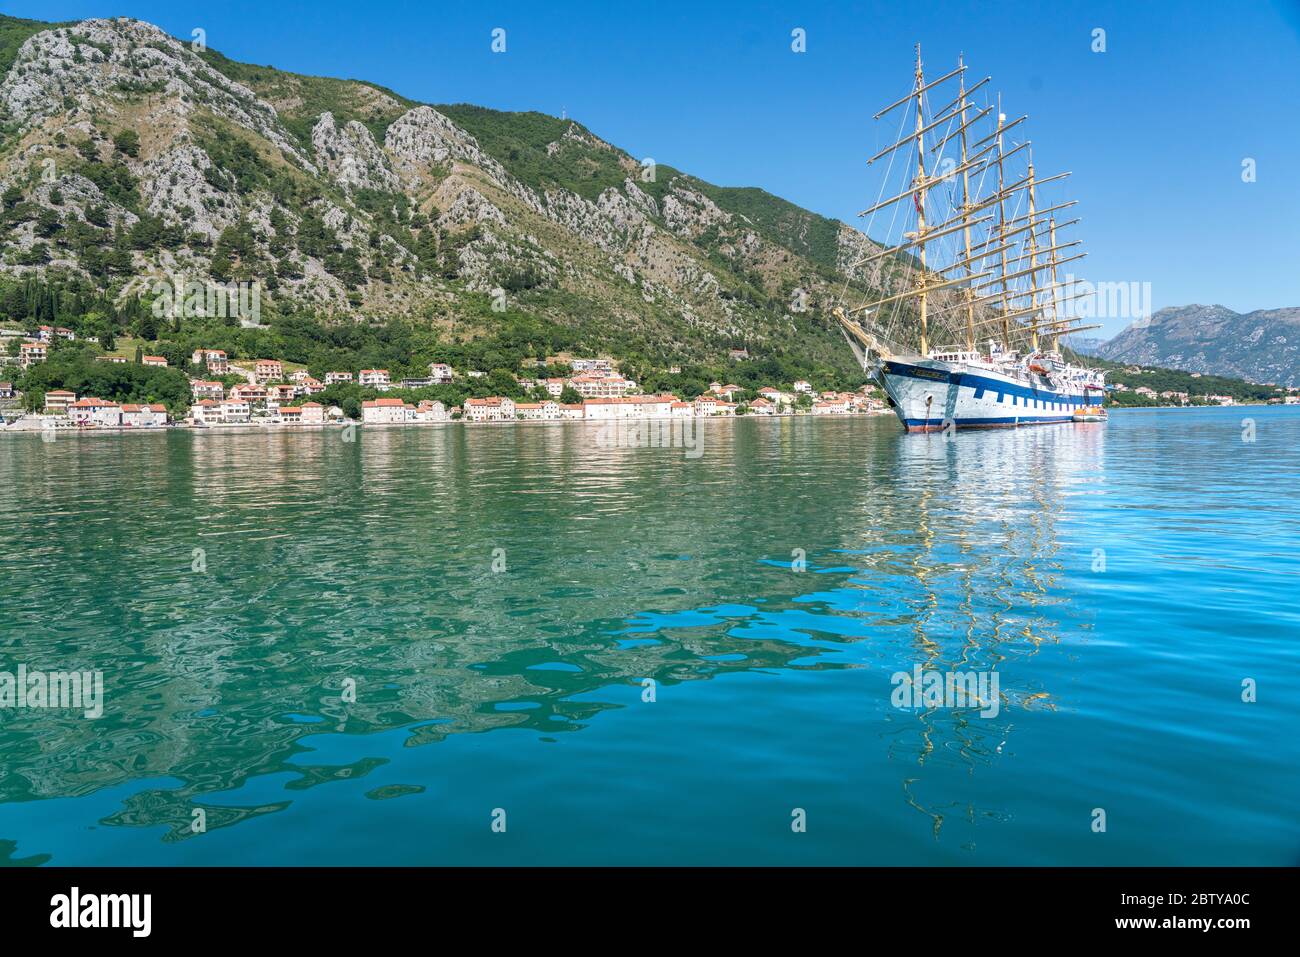 Royal Clipper in Kotor, Montenegro. Worlds largest full-rigged sailing ship. Stock Photo